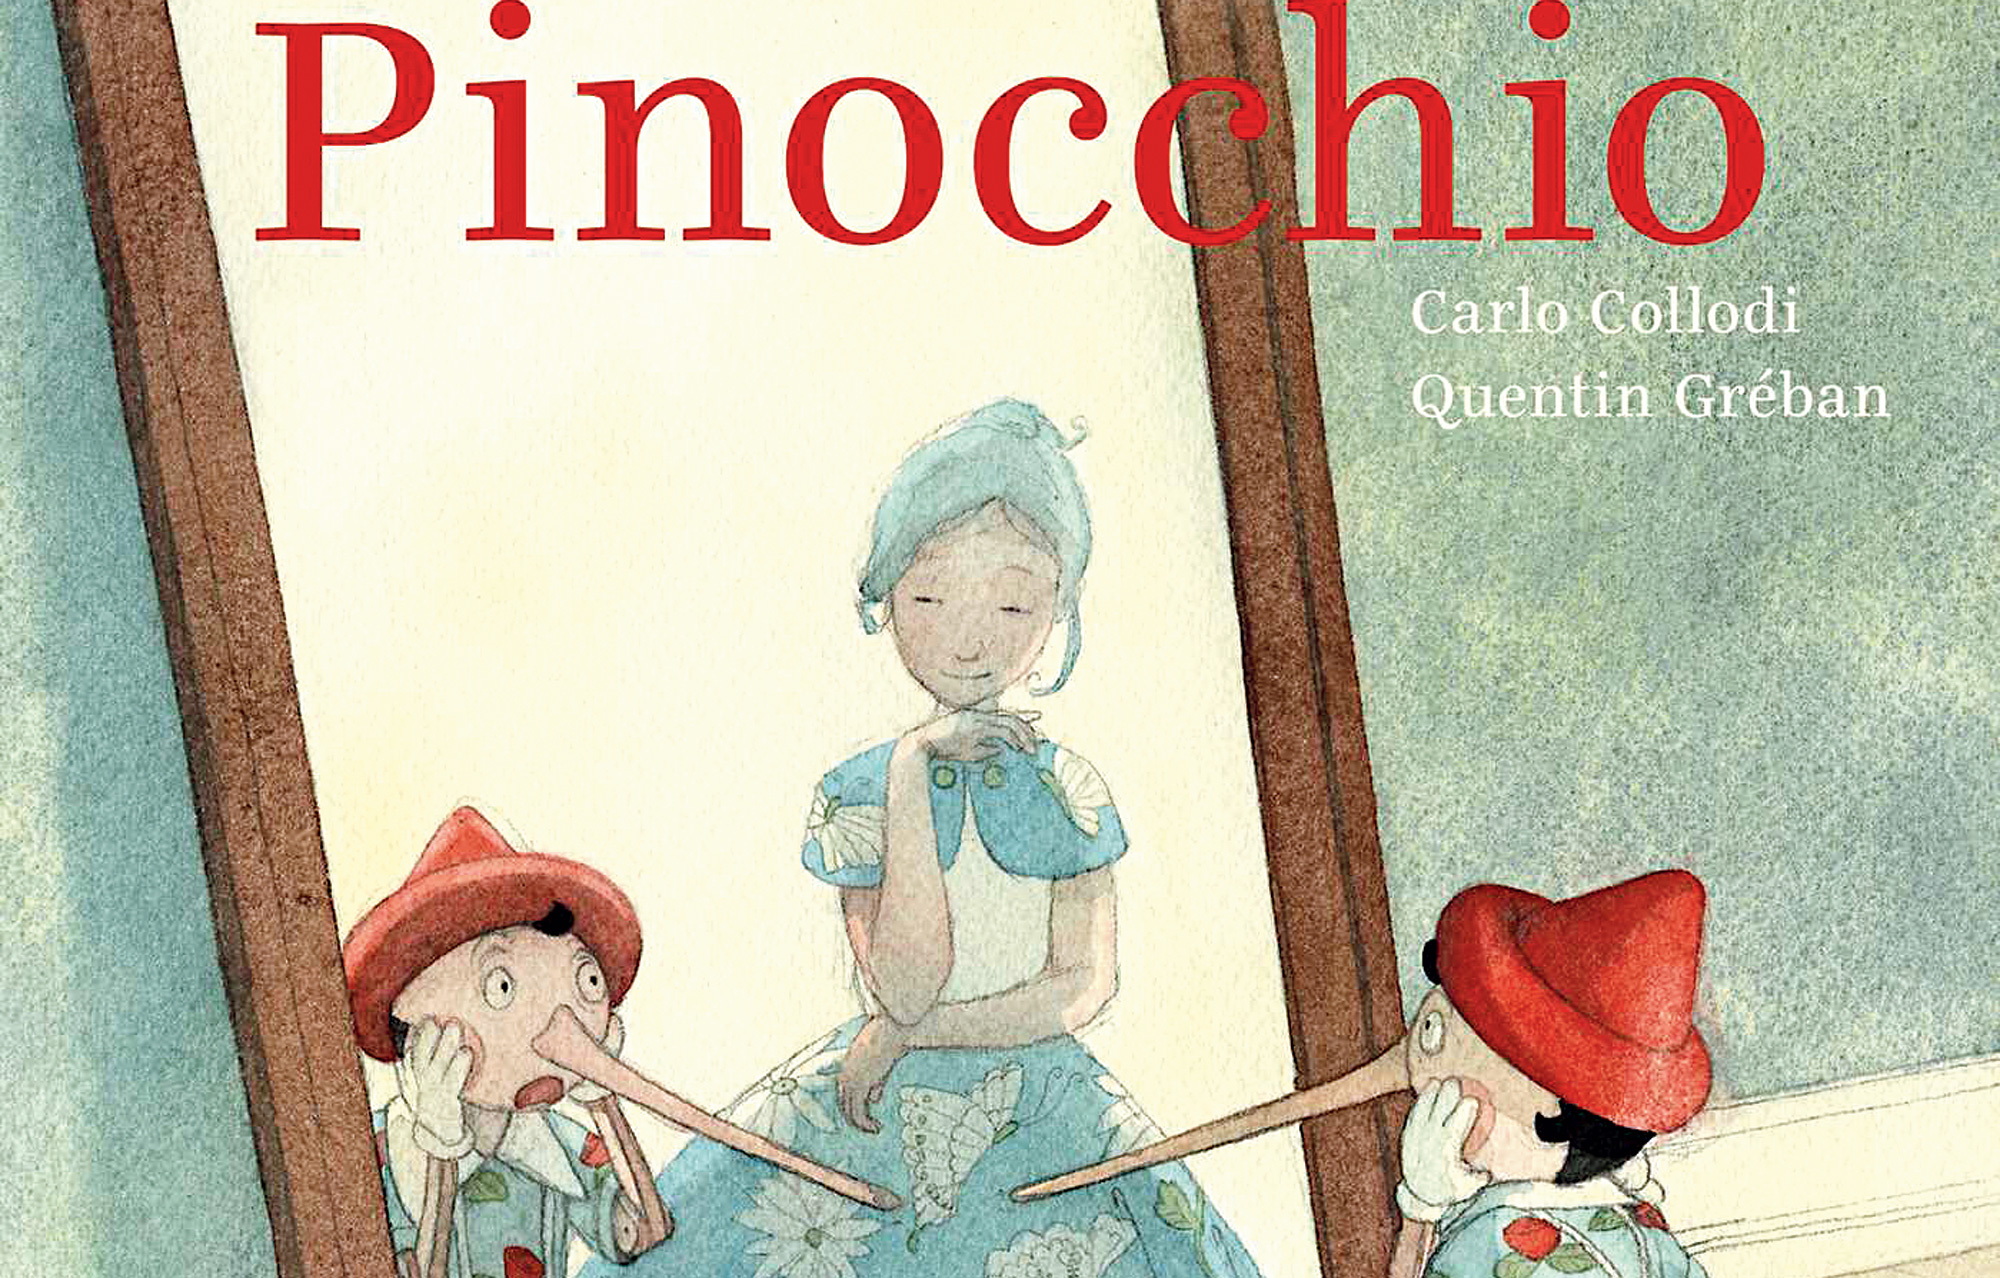 What the Original “Pinocchio” Really Says About Lying